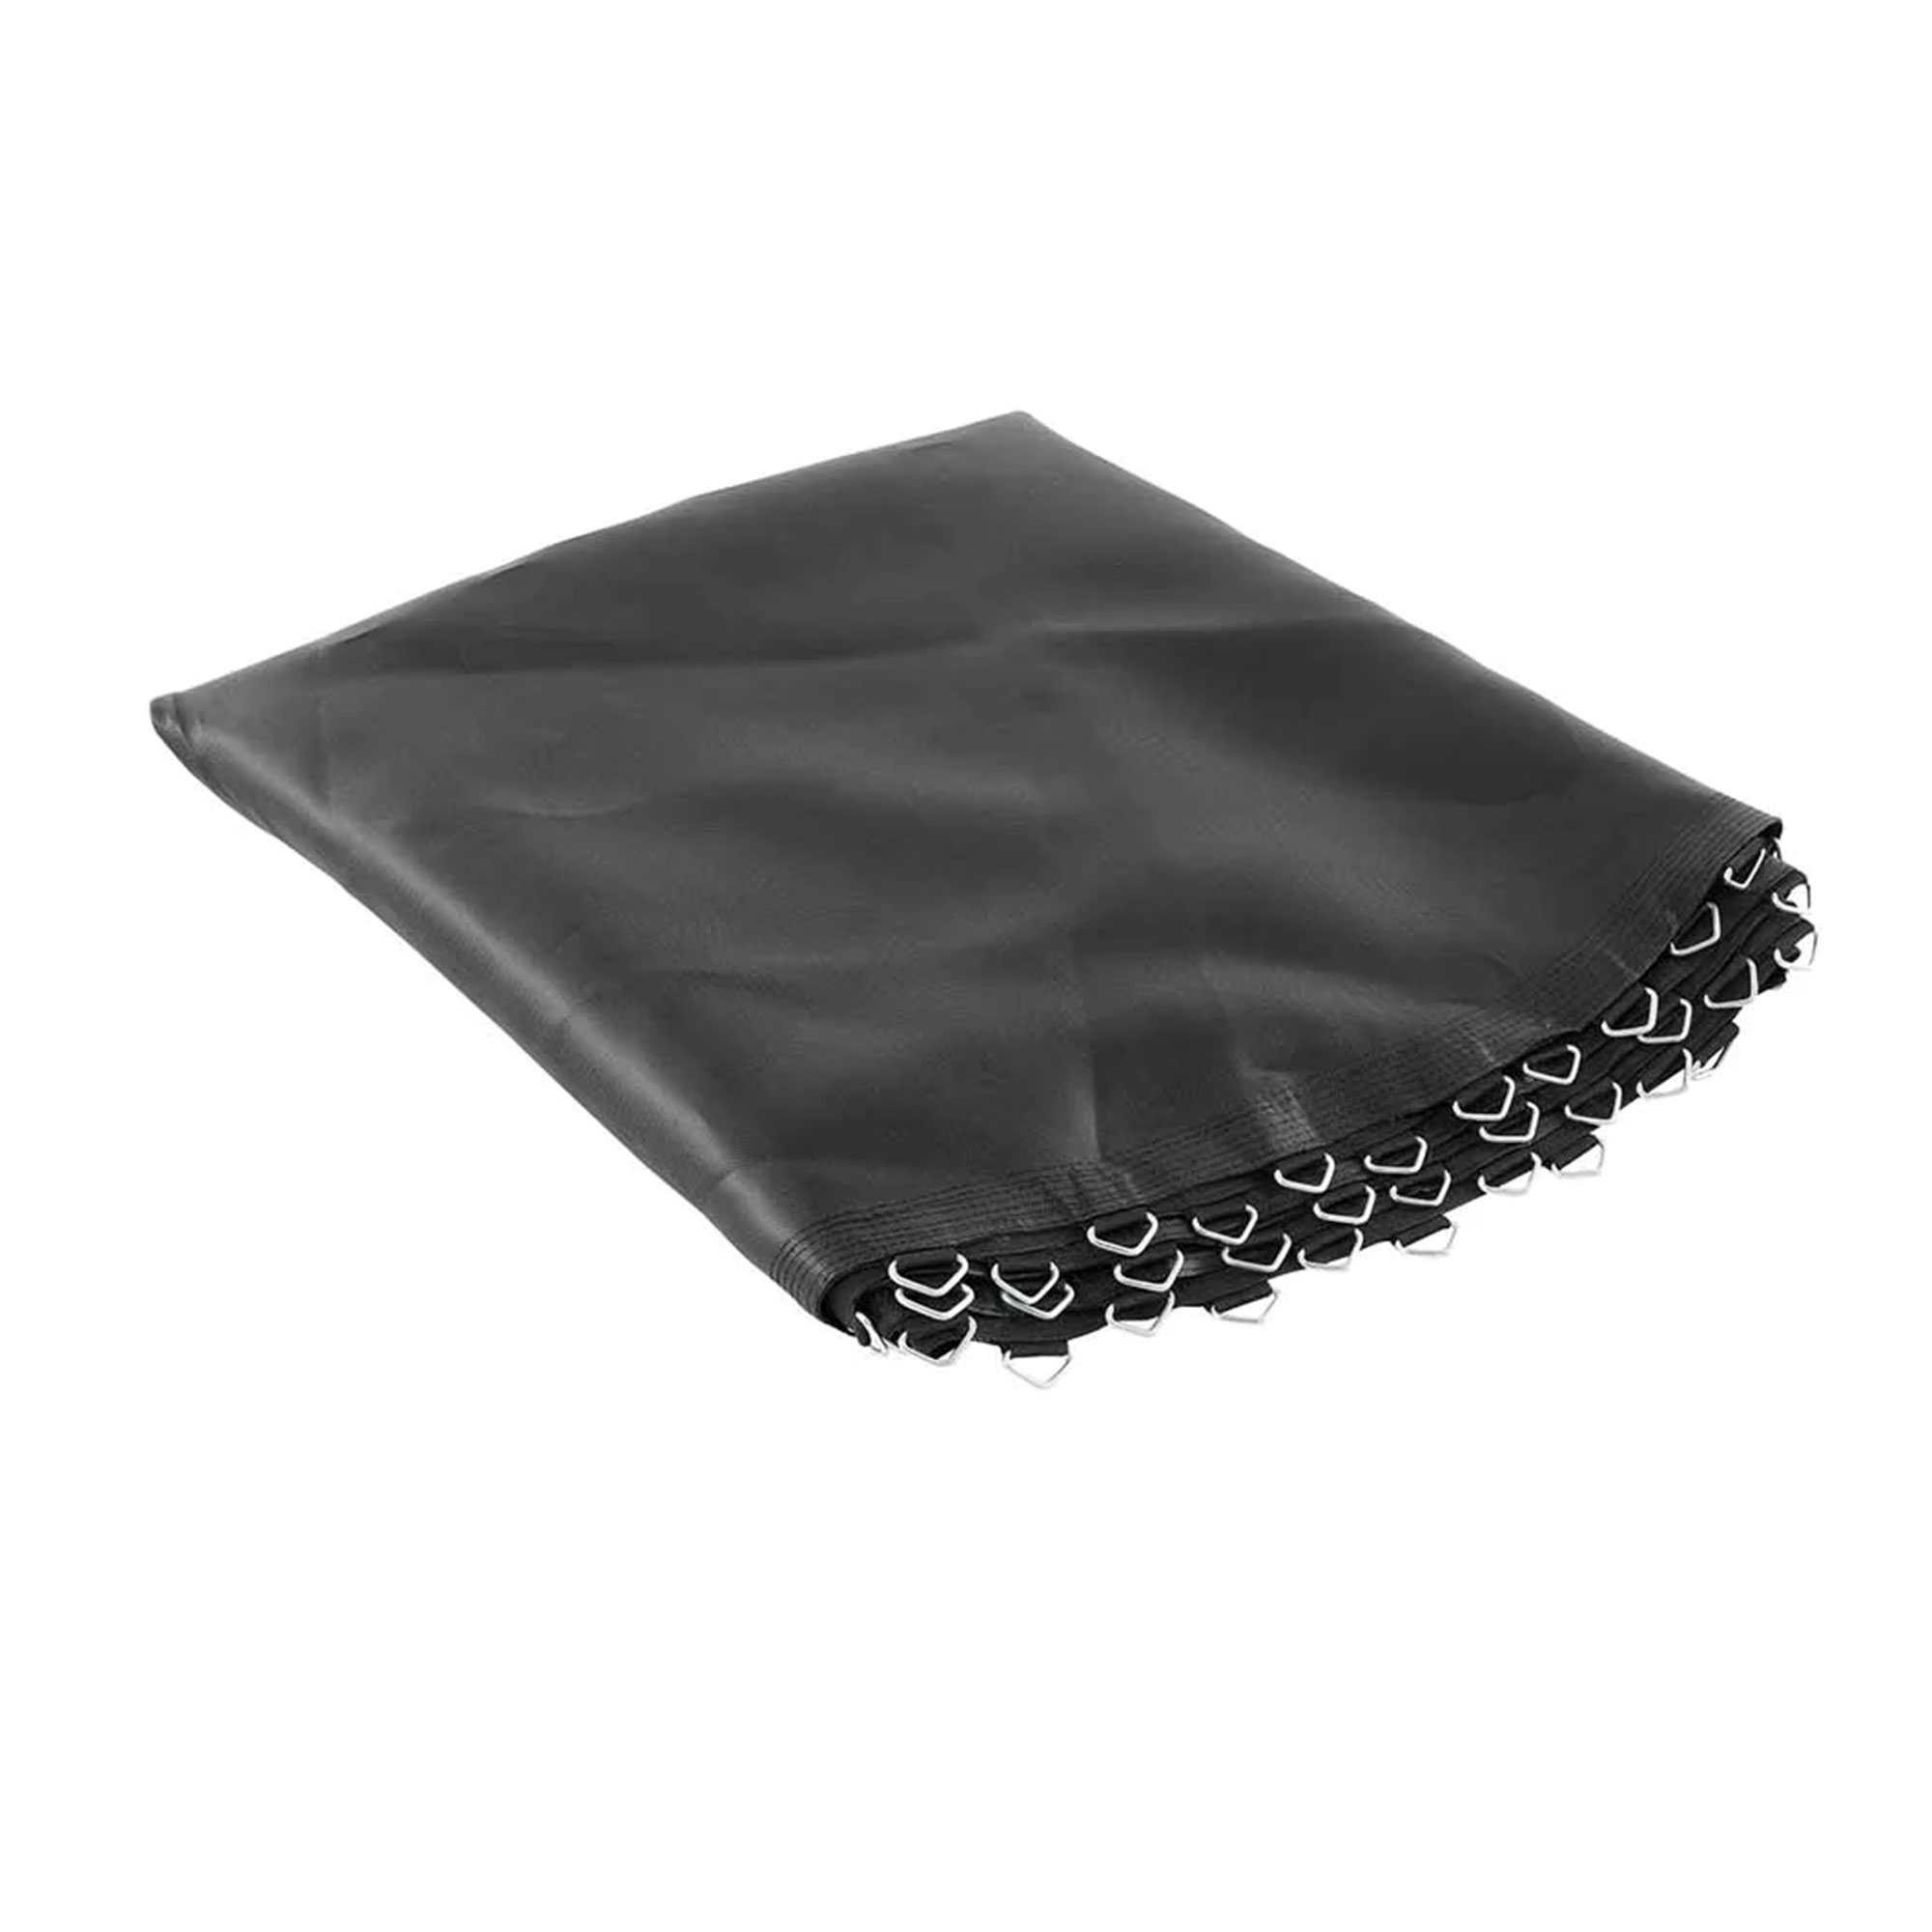 Upper Bounce Trampoline Replacement Mat for 14 Foot Round Frames - image 1 of 4